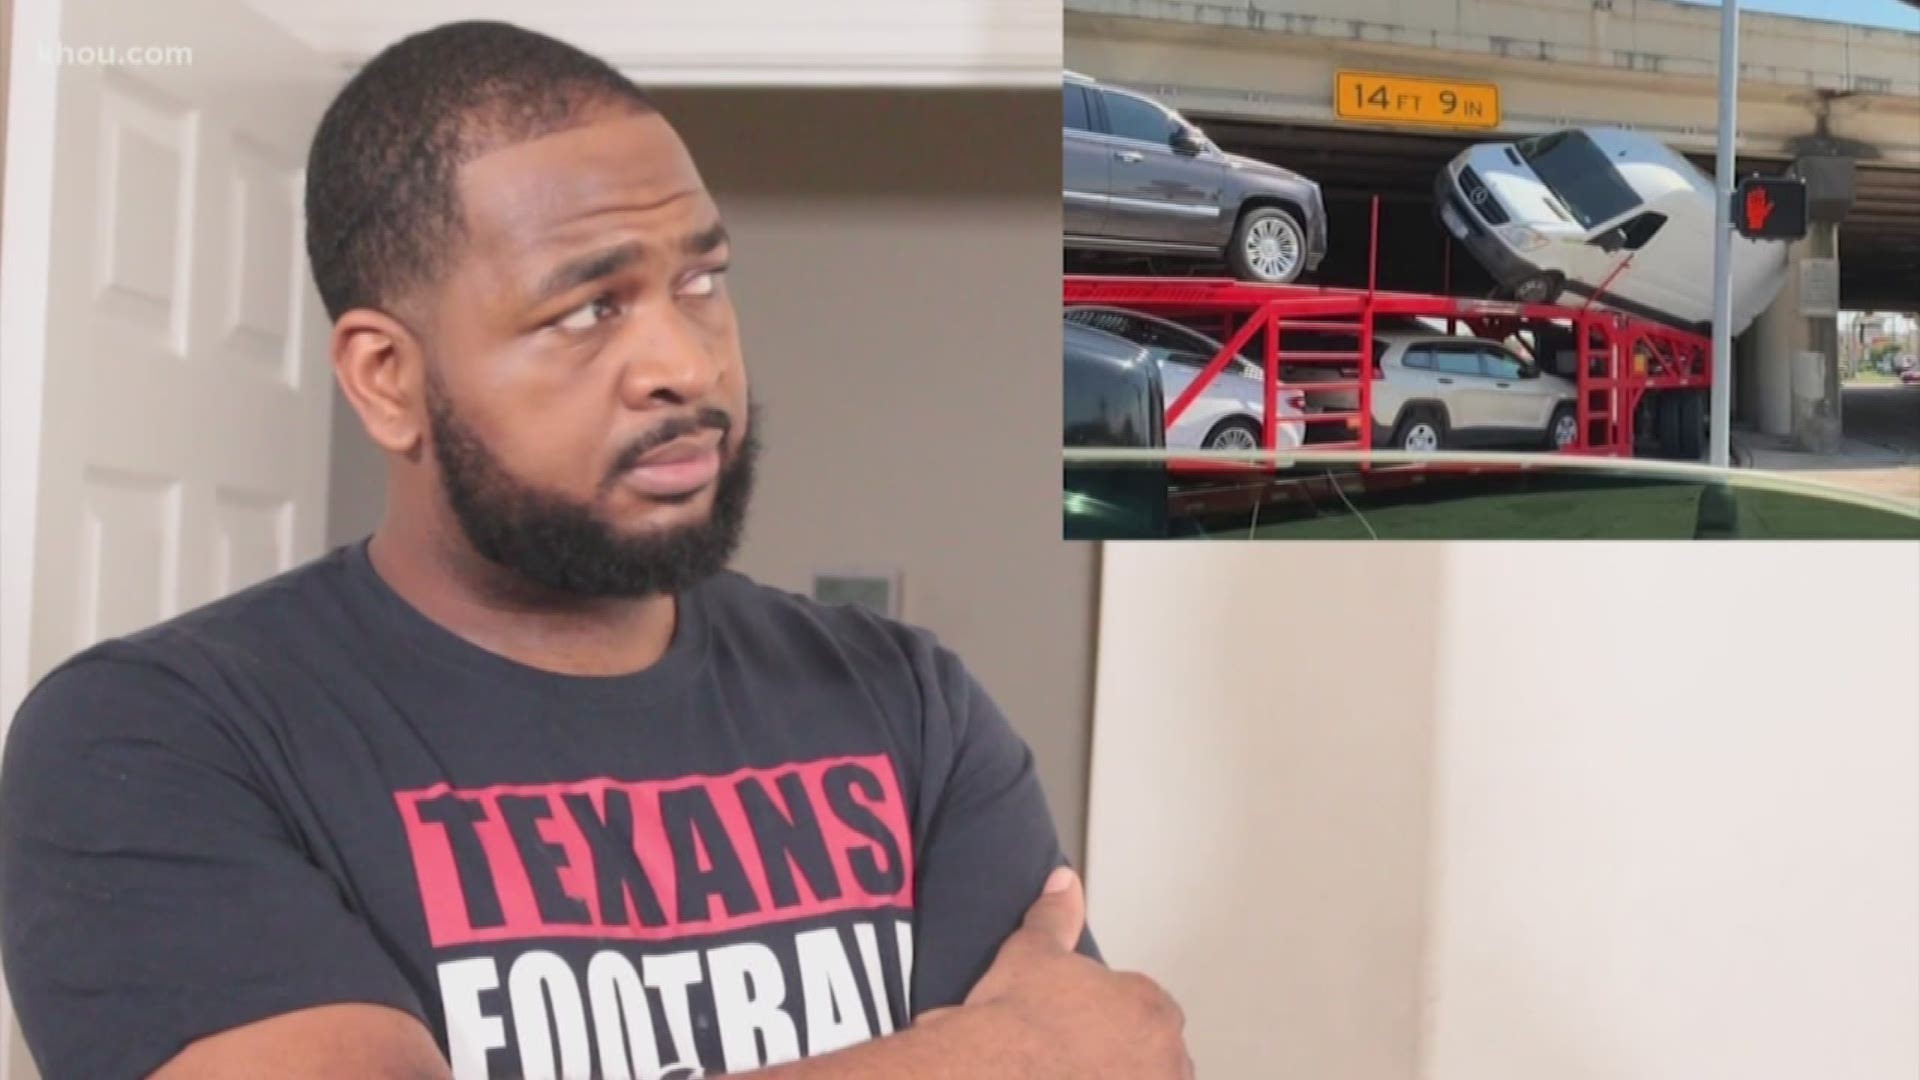 Houston drivers can definitely get a bad wrap, and one truck driver didn't help that reputation recently.
Chinedu Ogu has the unbelievable video.